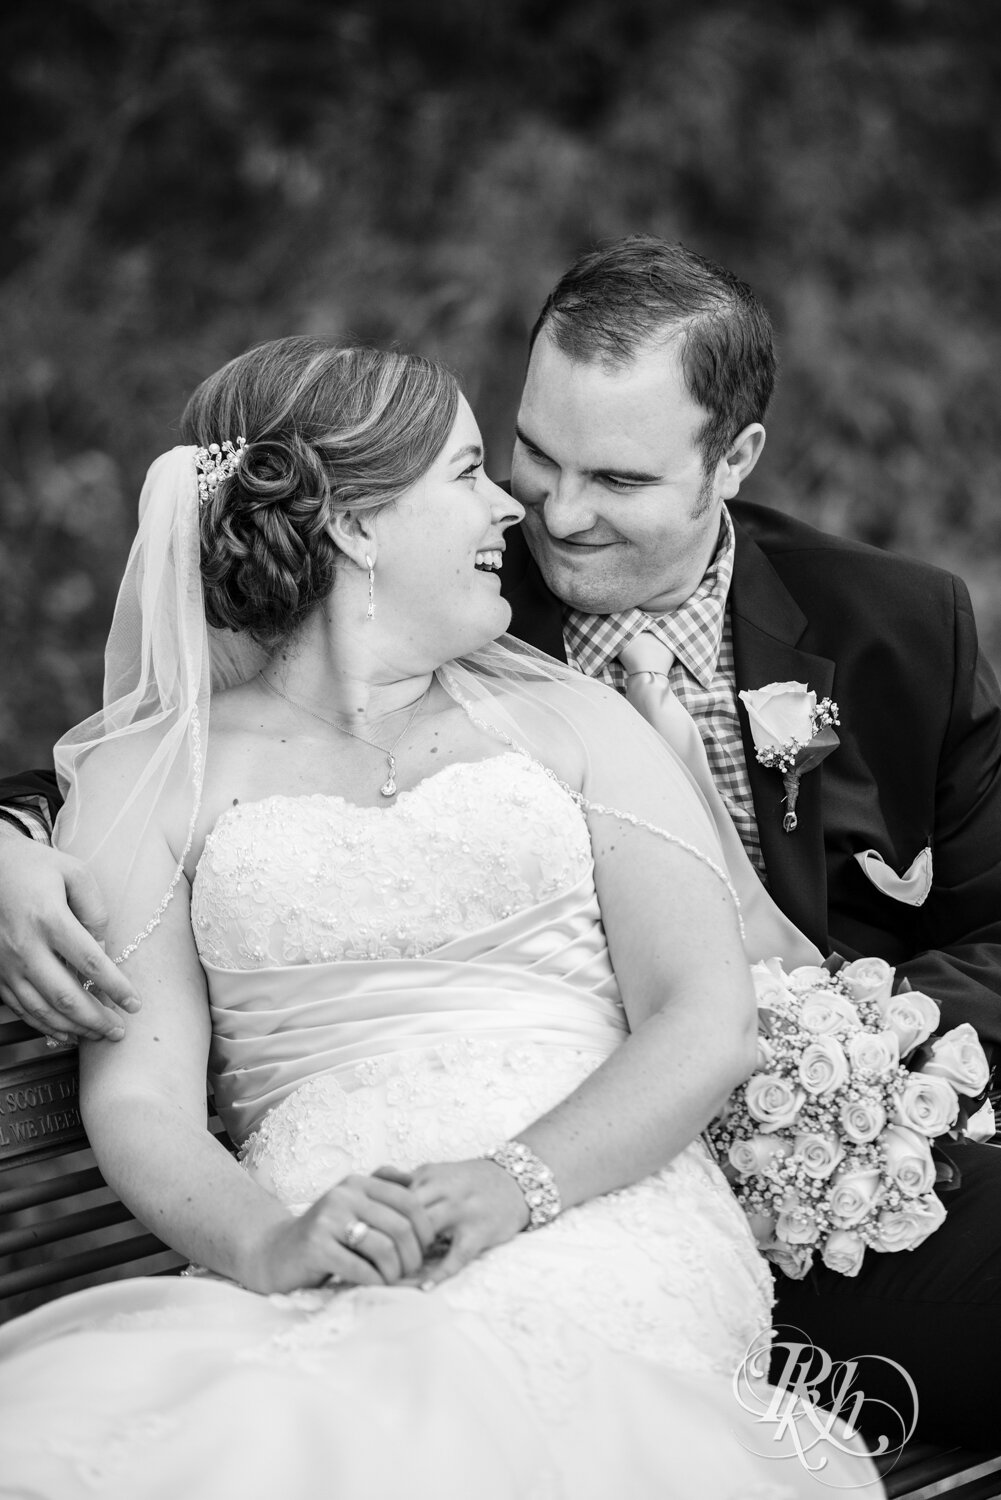 Bride and groom smile by wildflowers at Eagan Community Center in Eagan, Minnesota.